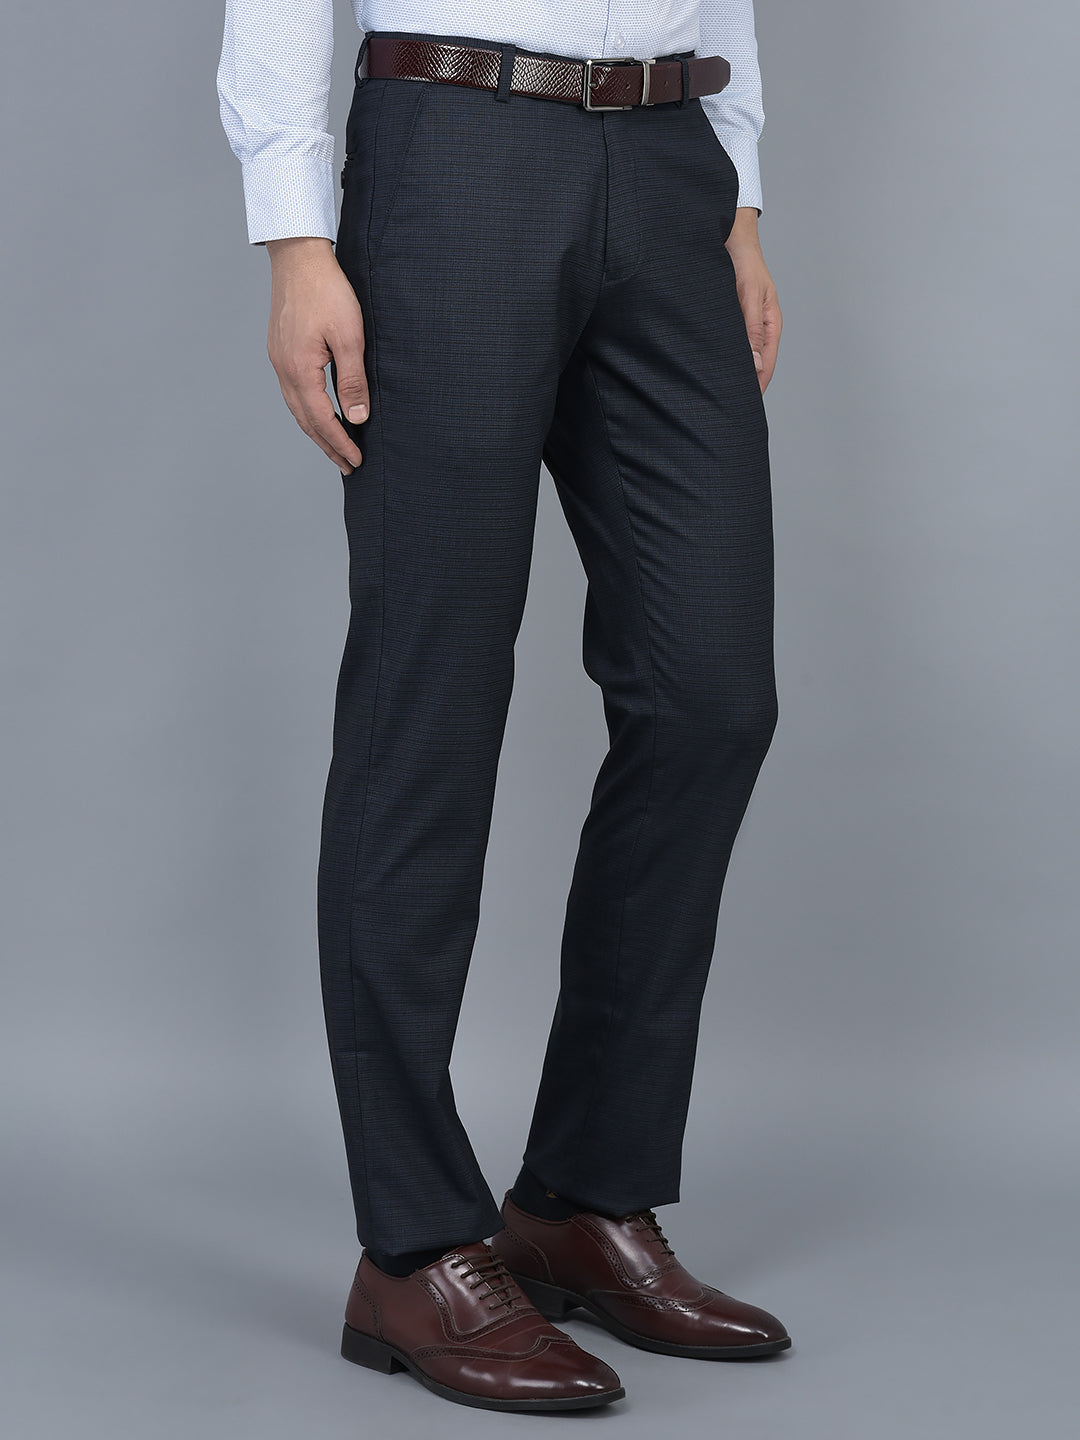 Textured Formal Trousers In Navy B91 Deaser